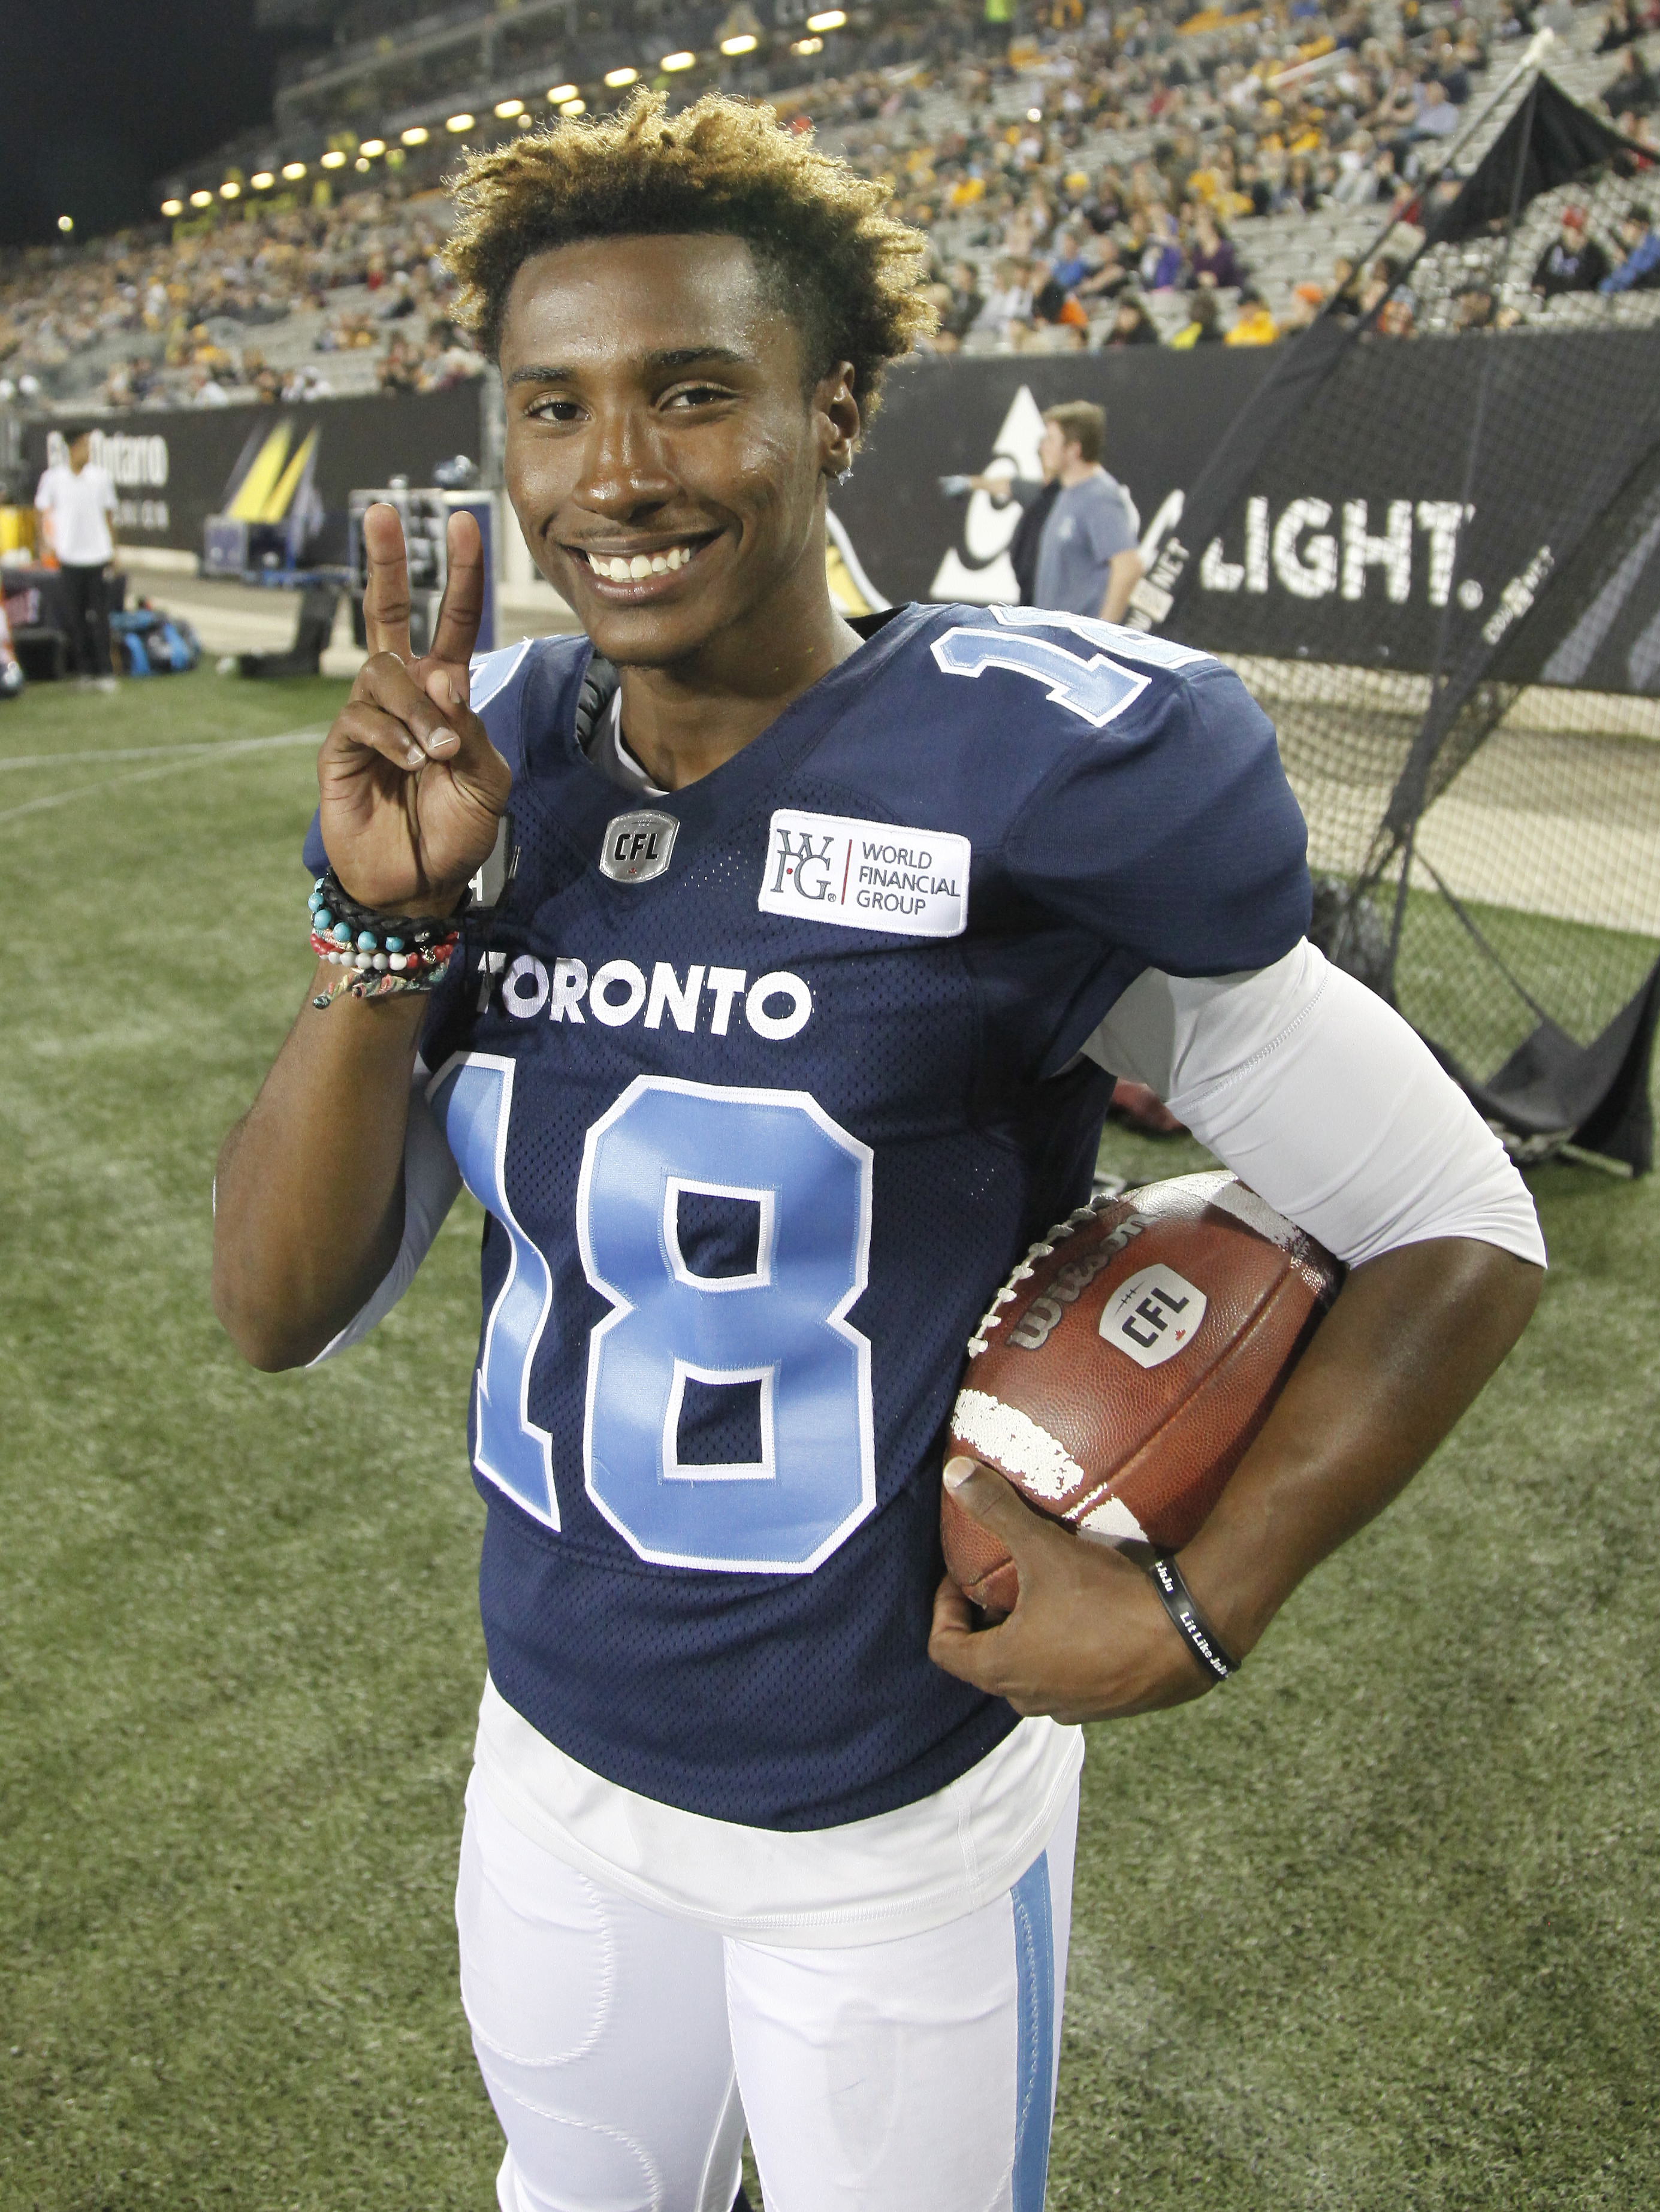 Deestroying previously had a brief sting with the CFL's Toronto Argonauts